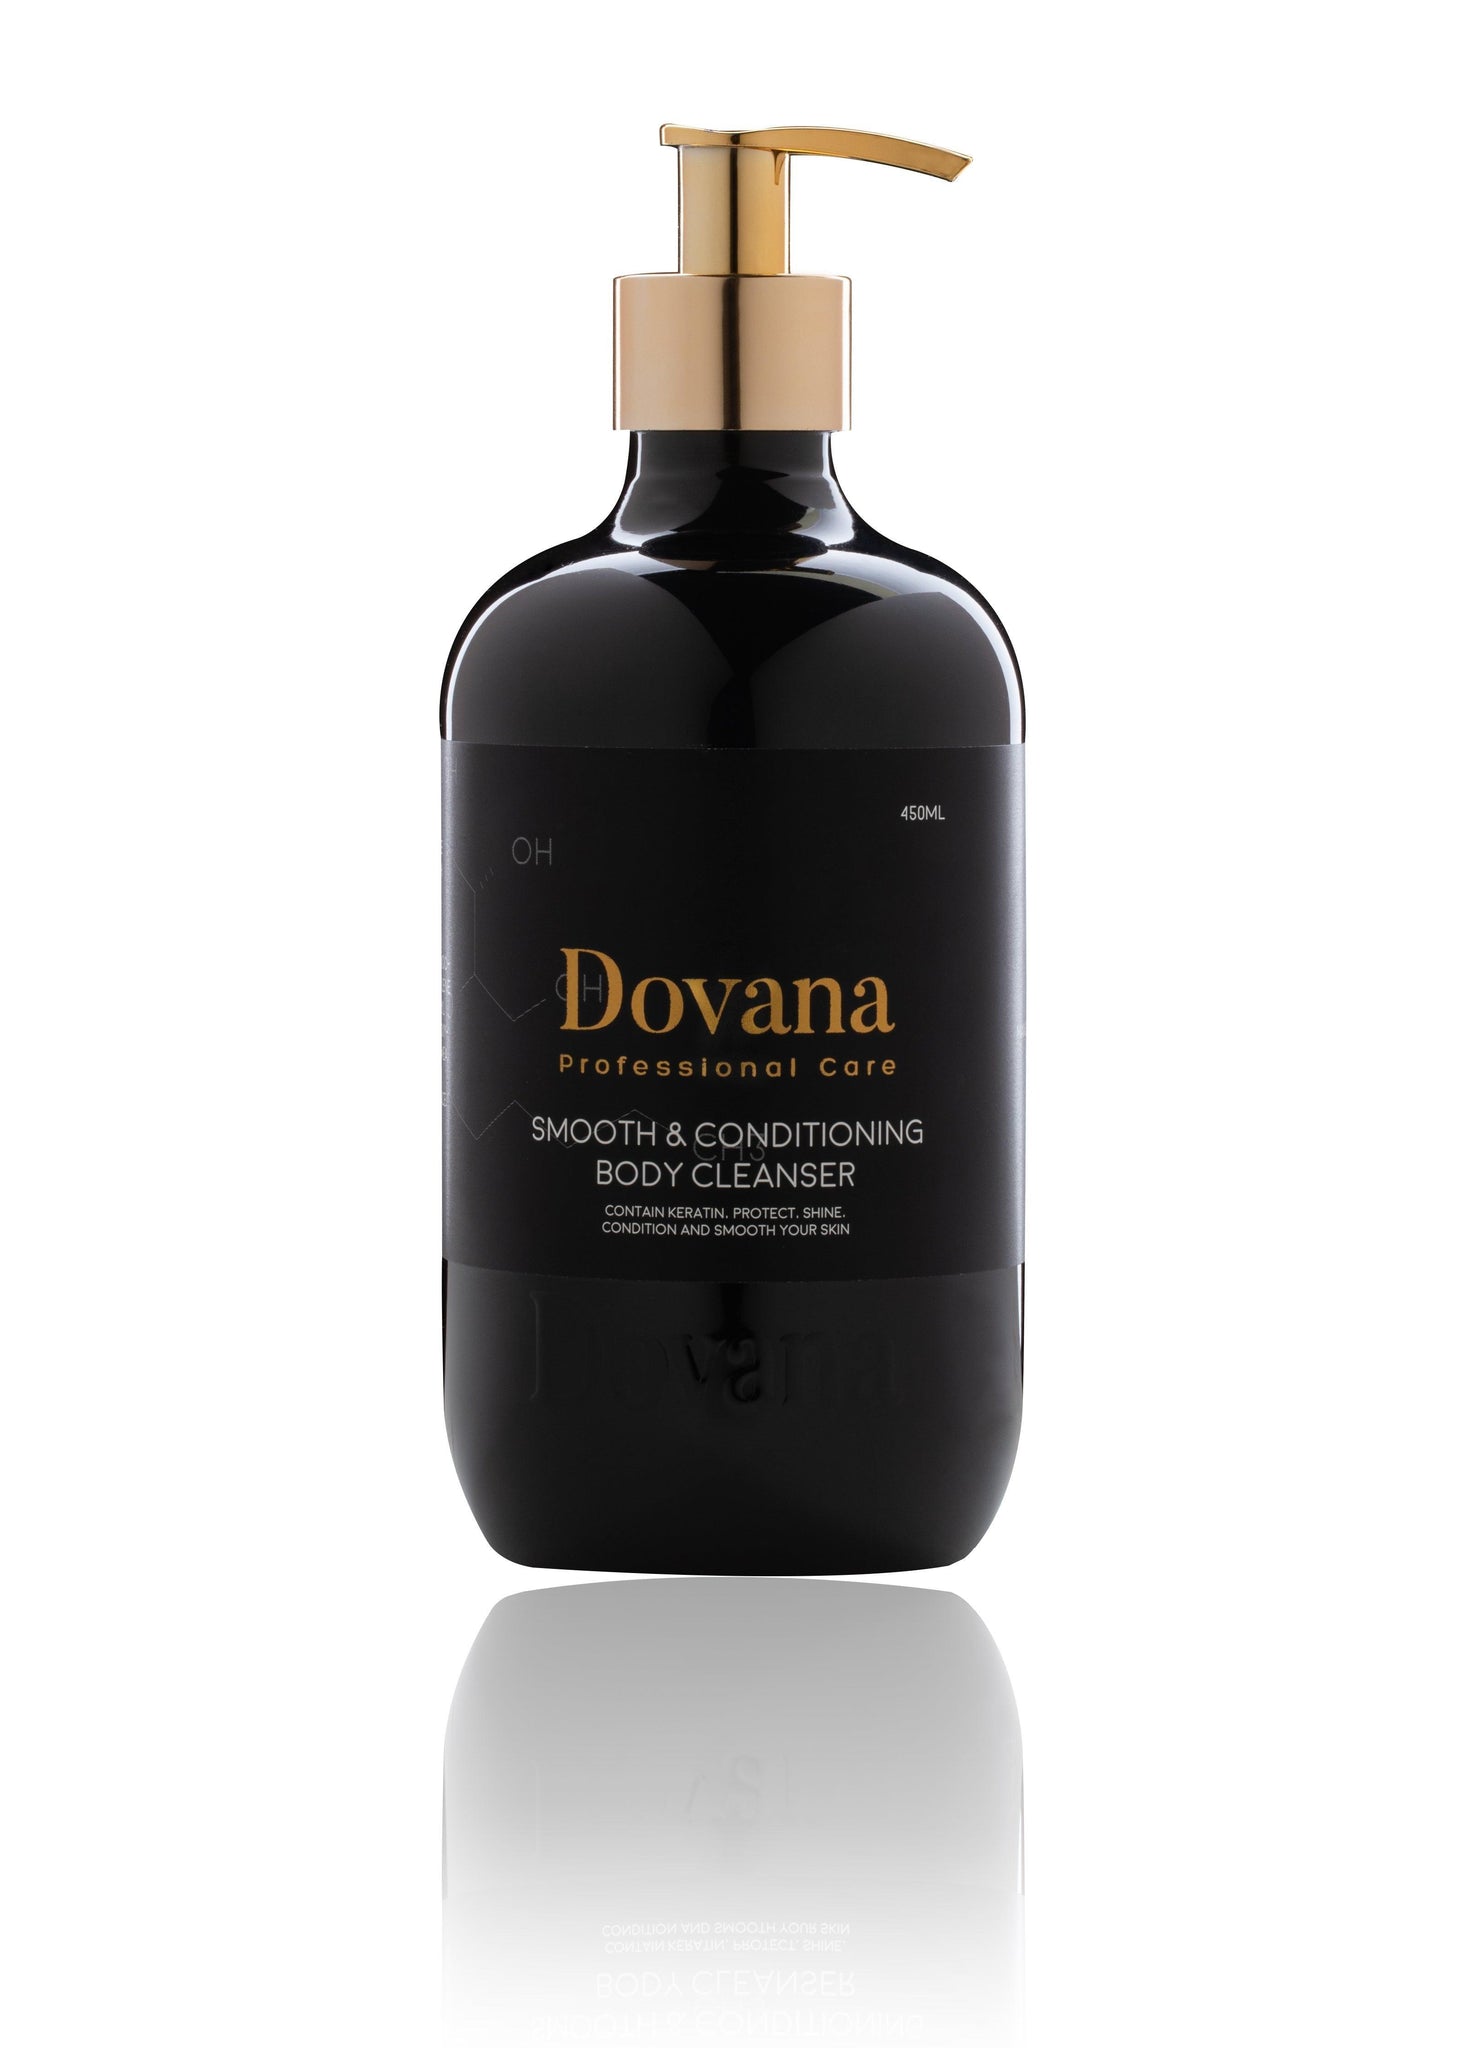 Dovana’s Smooth and Conditioning Body Cleanser 450 ml - Mrayti Store